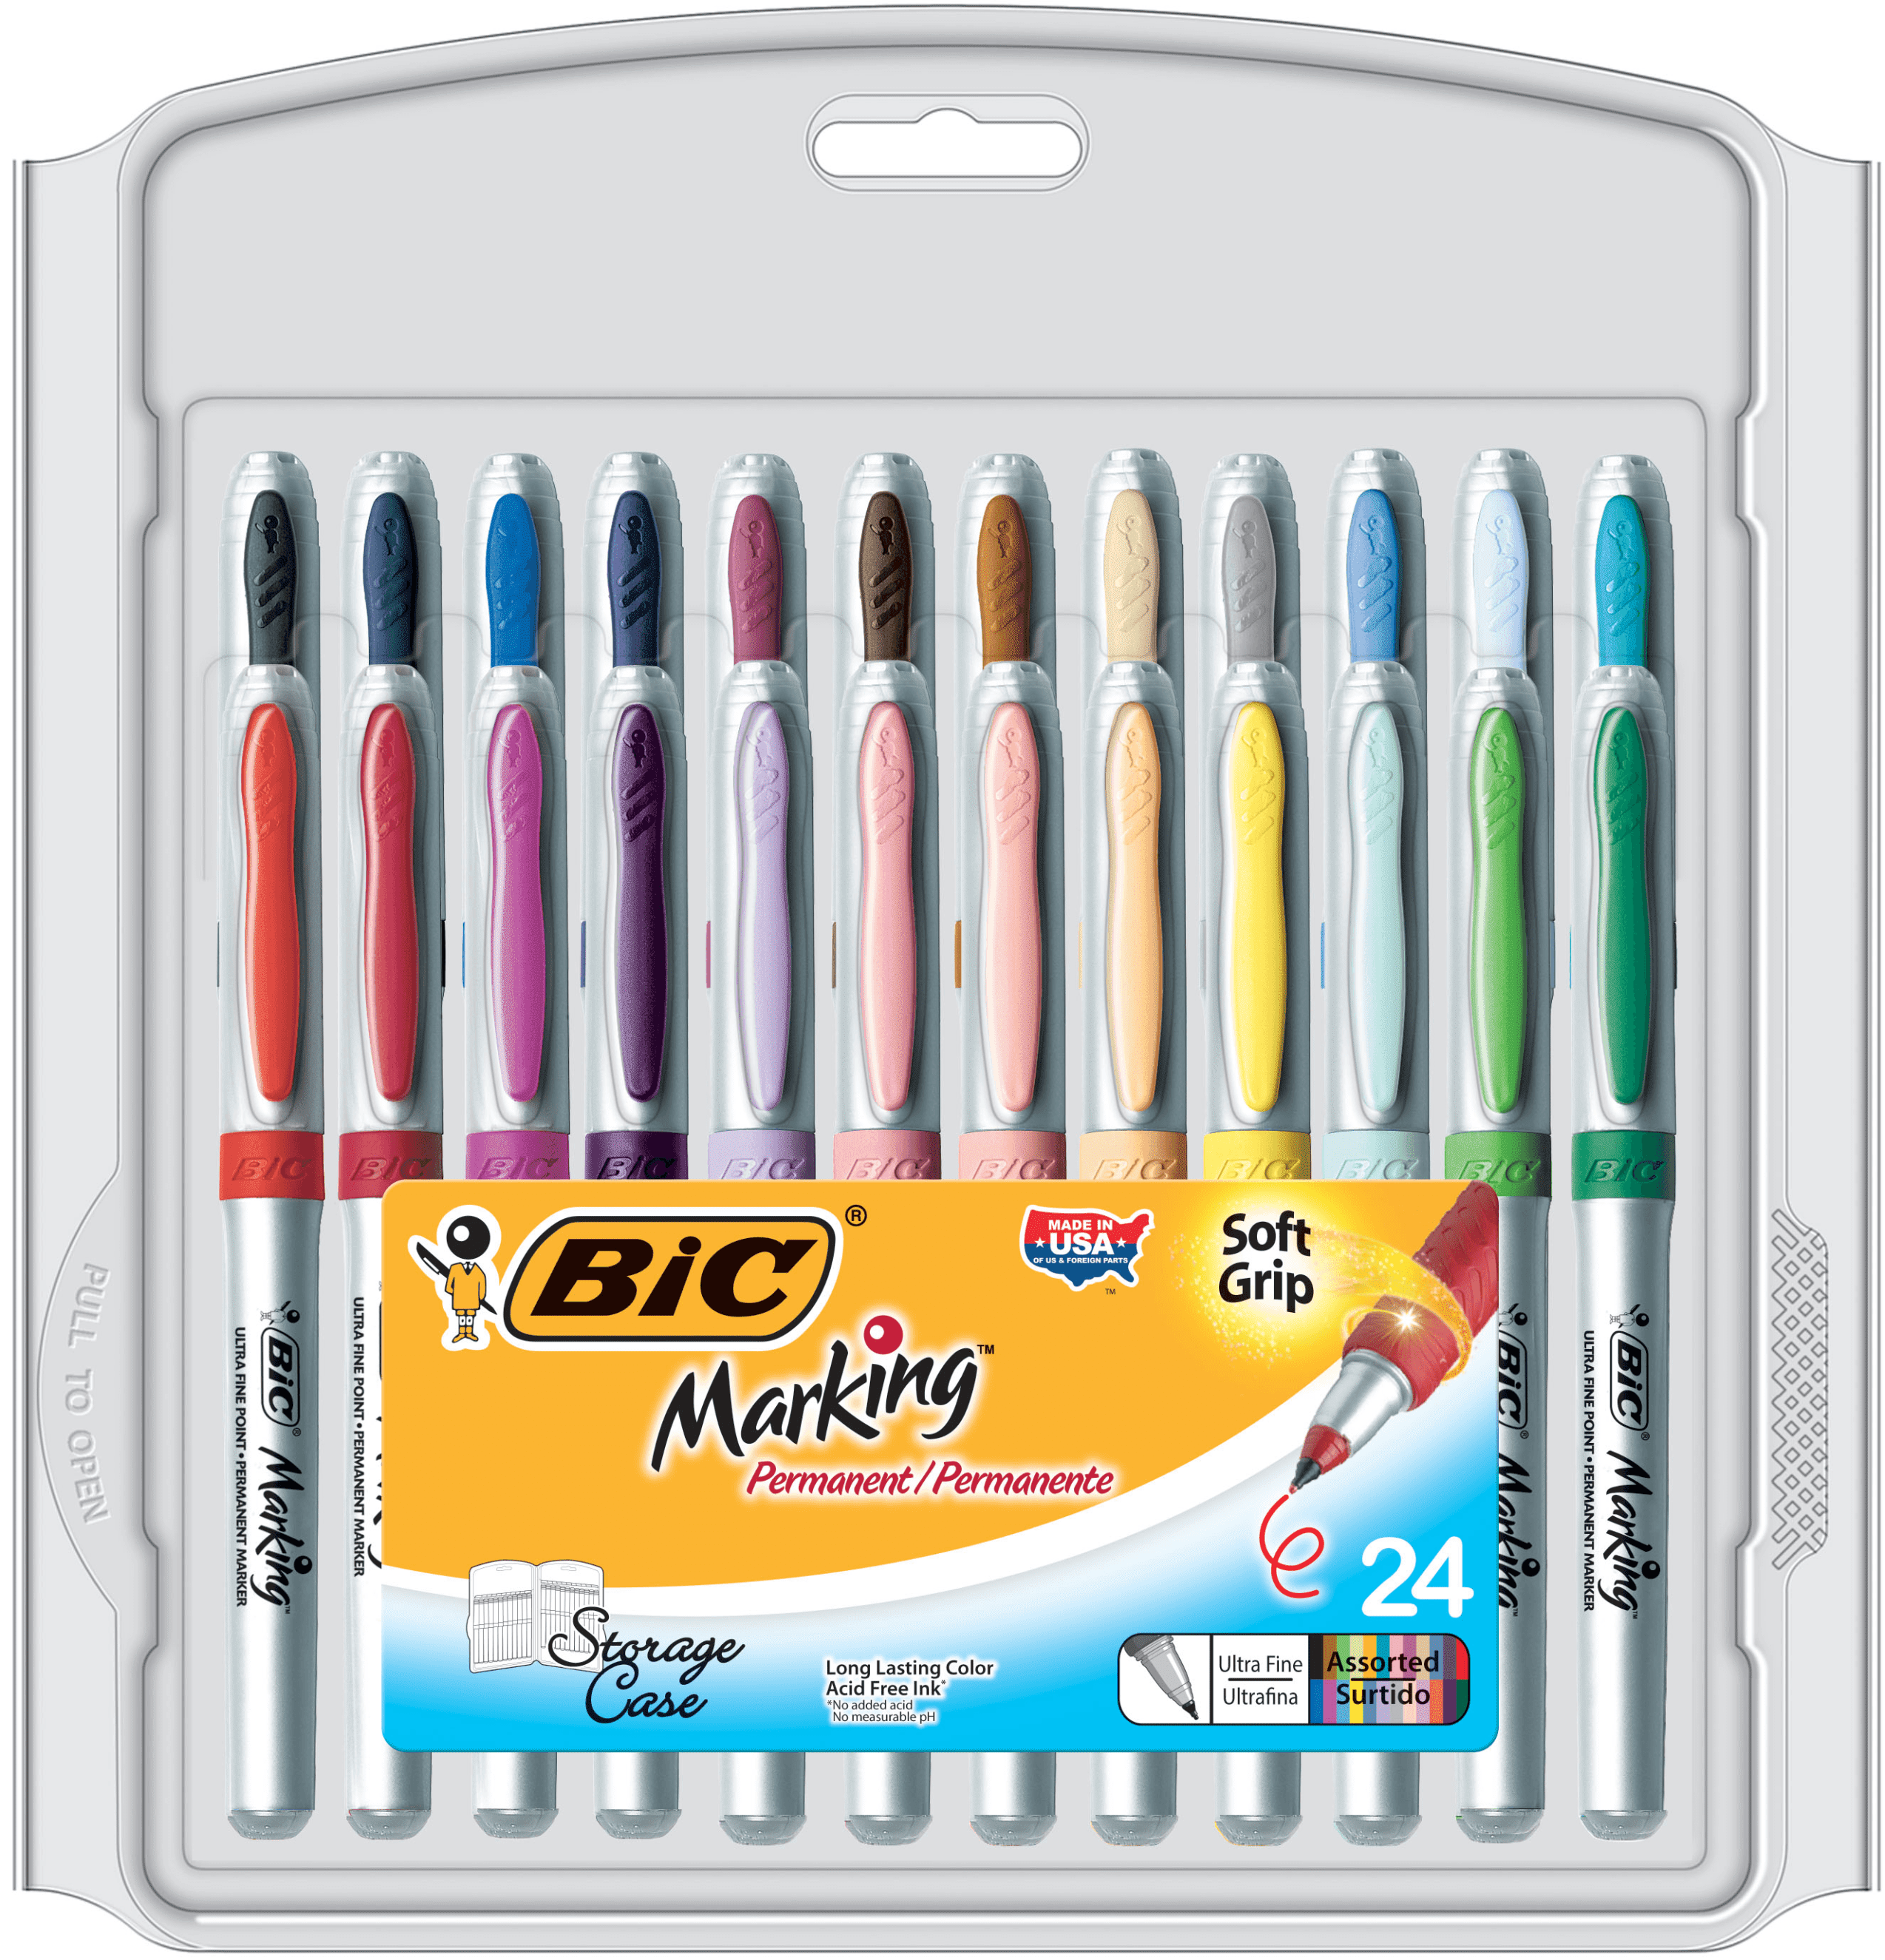  Shuttle Art Permanent Markers, 24 Colors Fine Point Assorted  Colors Permanent Marker Set, Works on Plastic,Wood,Stone,Metal and Glass  for Doodling, Coloring, Marking : Office Products